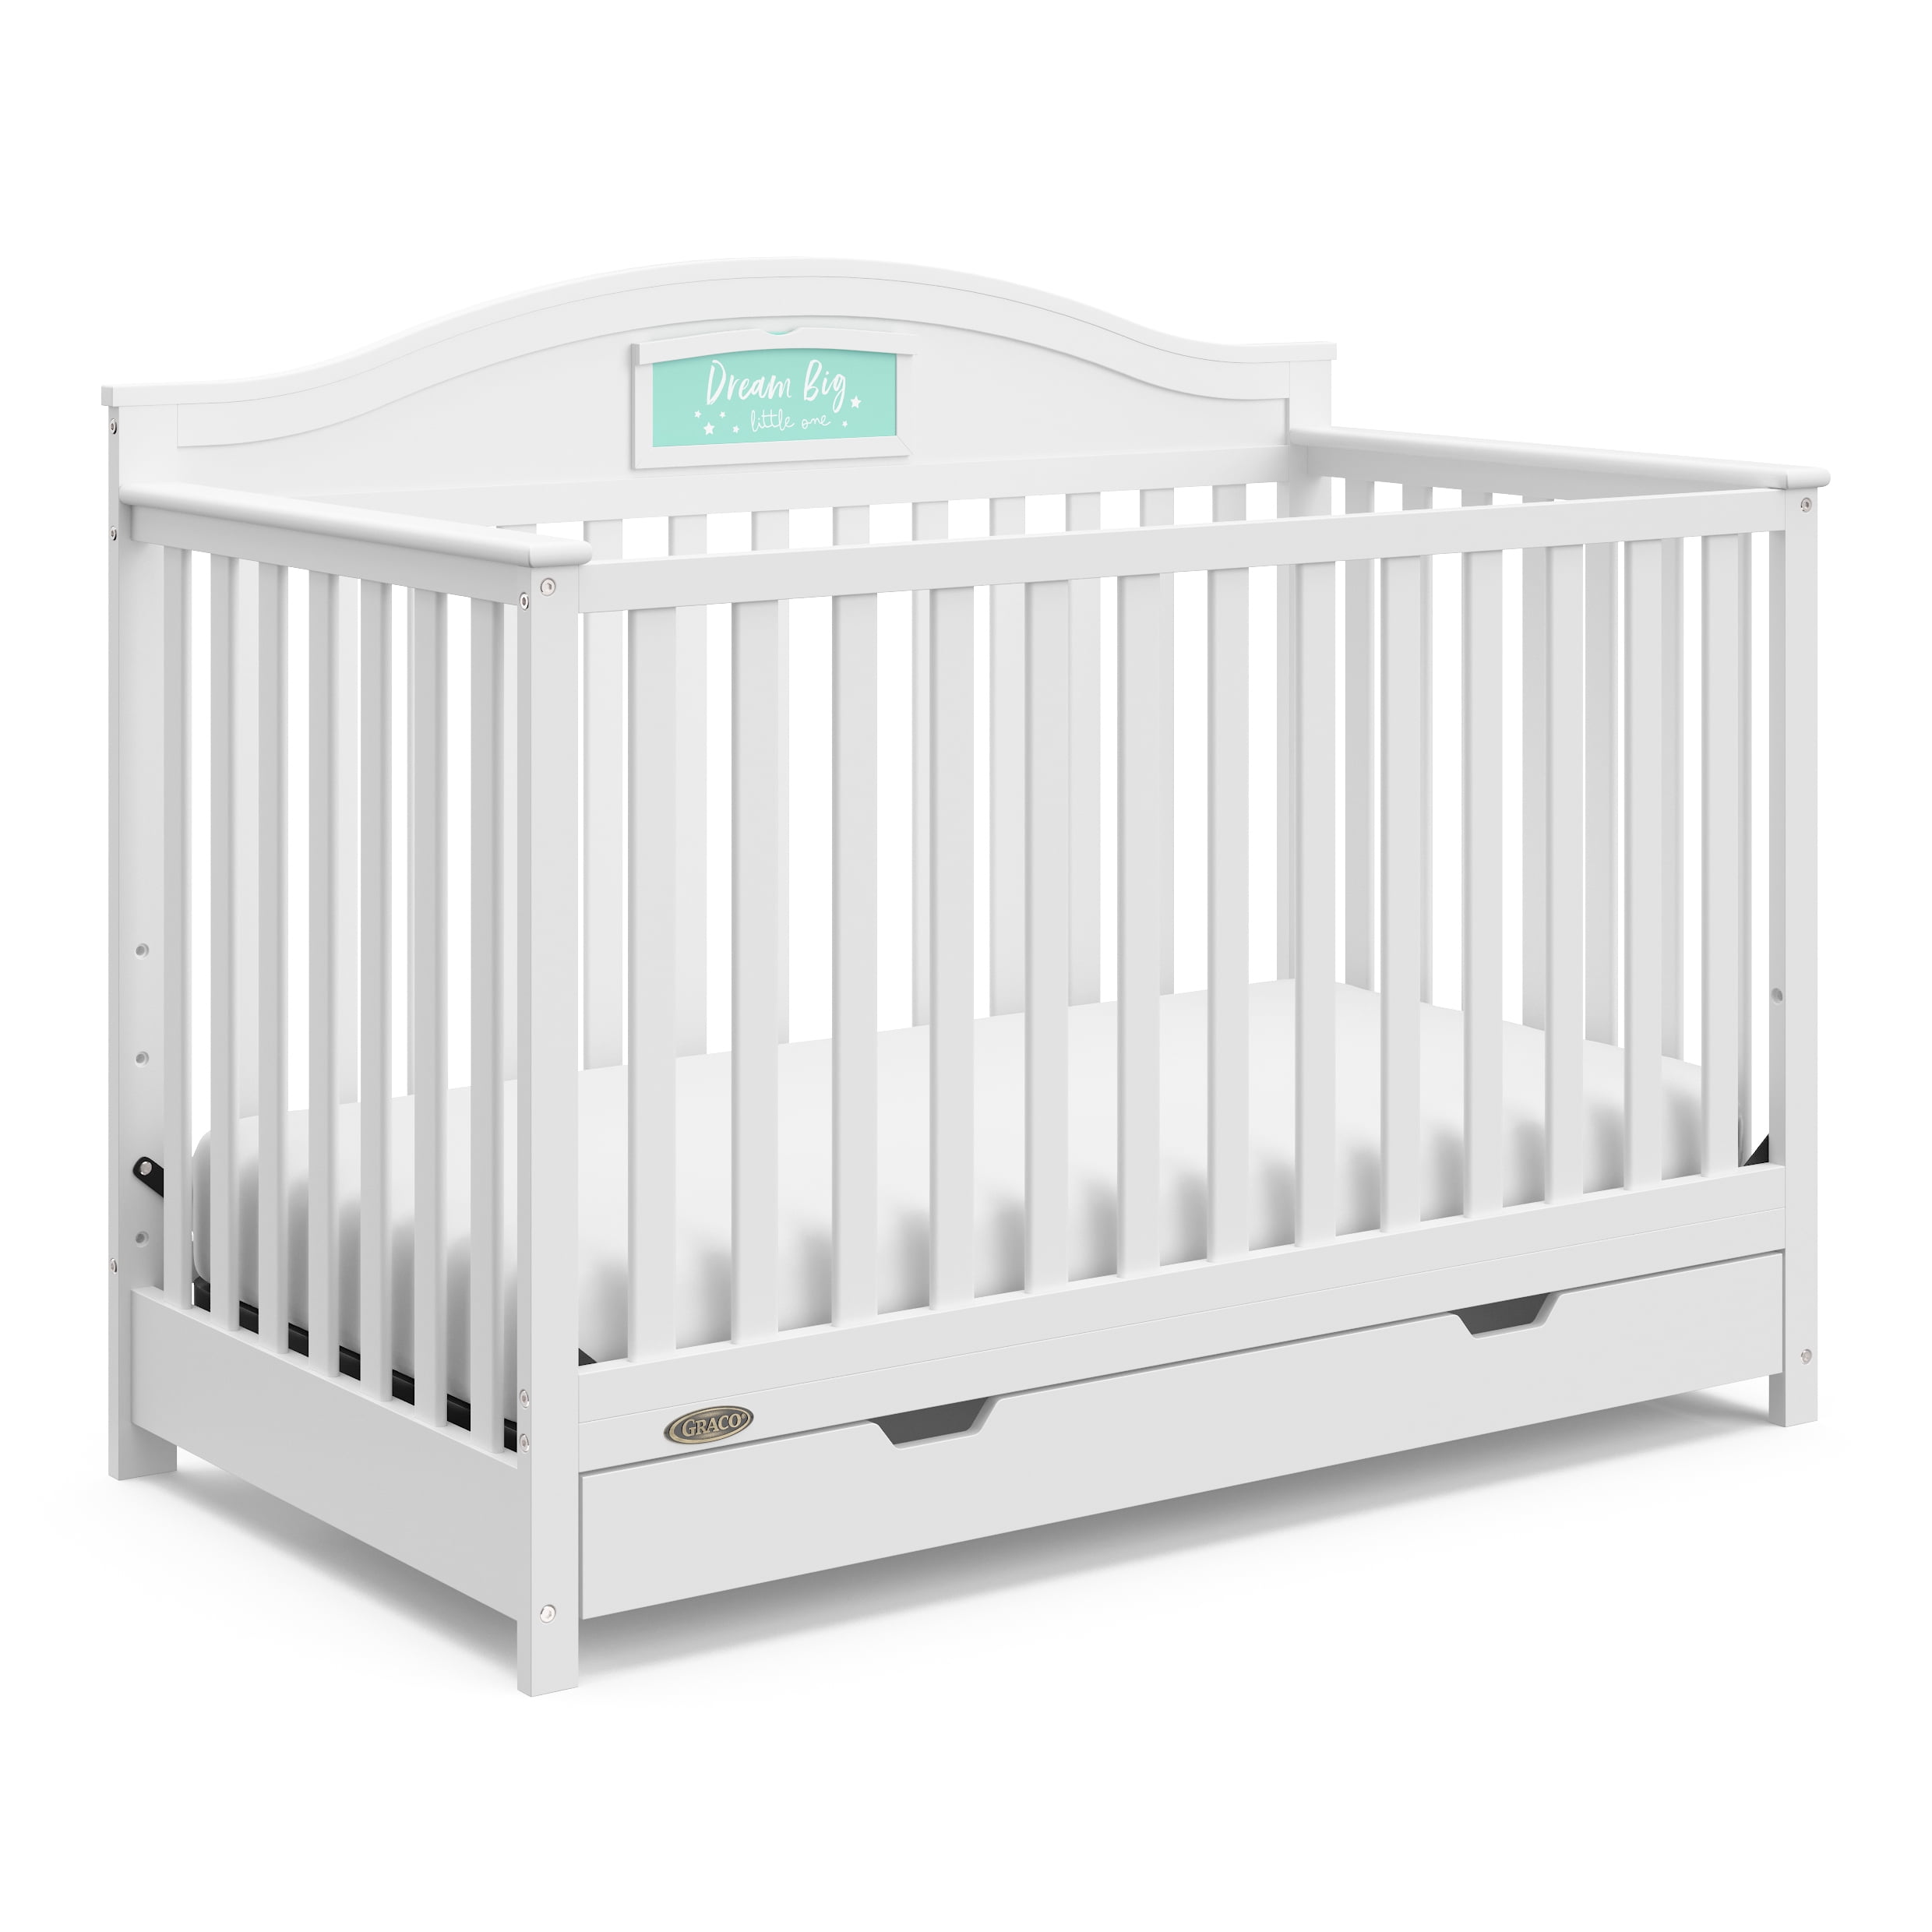 Graco Story 5-in-1 Convertible Baby Crib with Drawer, White - image 1 of 19